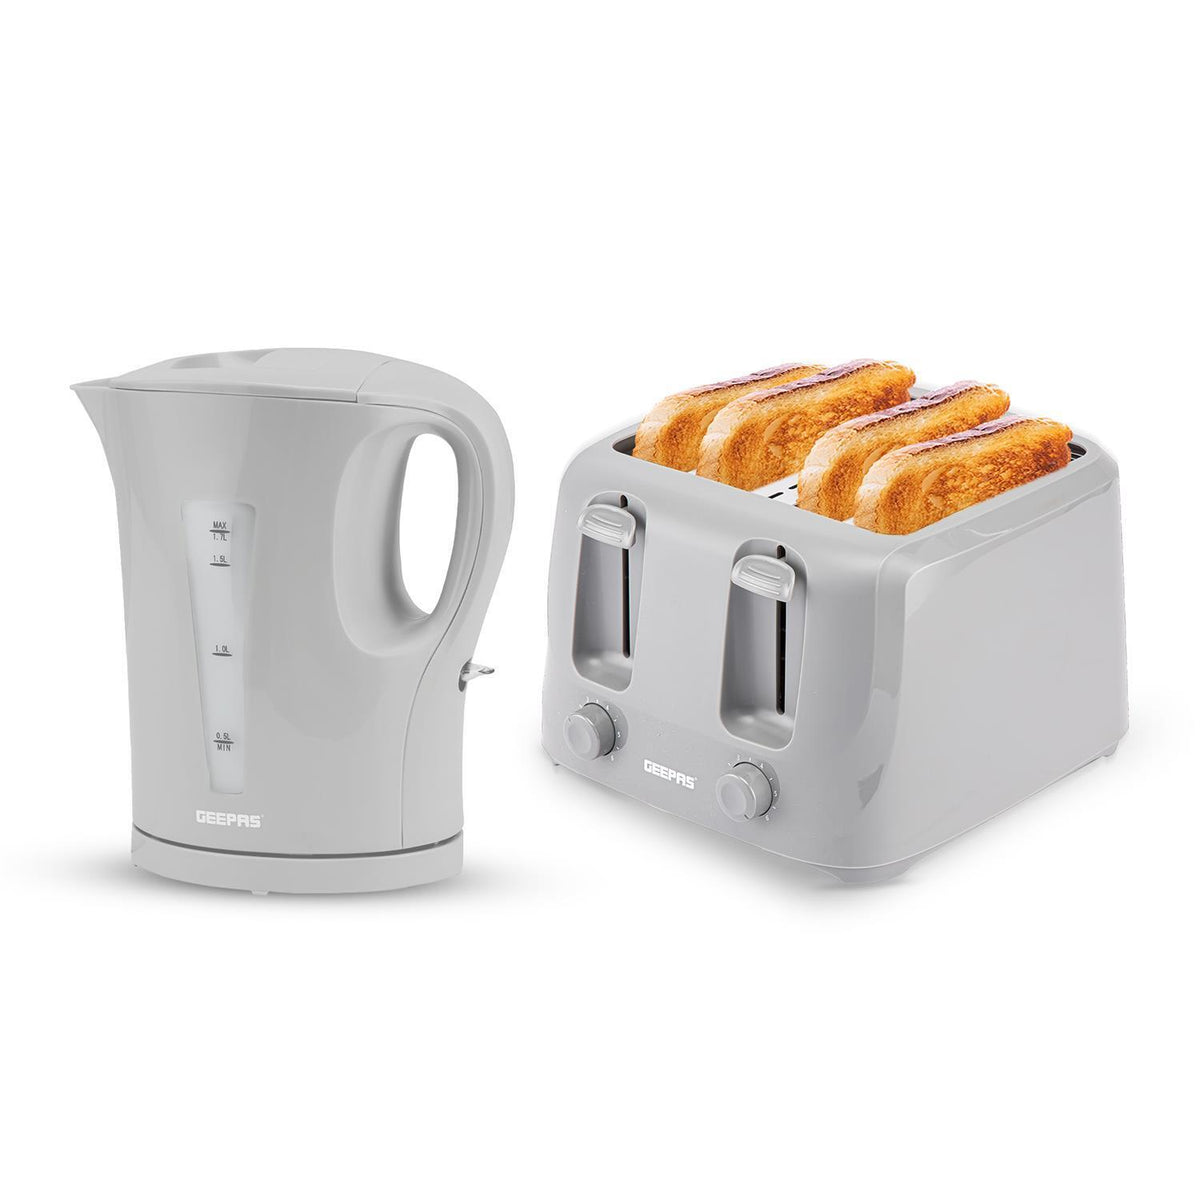 Grey 1.7L Electric Kettle and Four-Slice Toaster Set